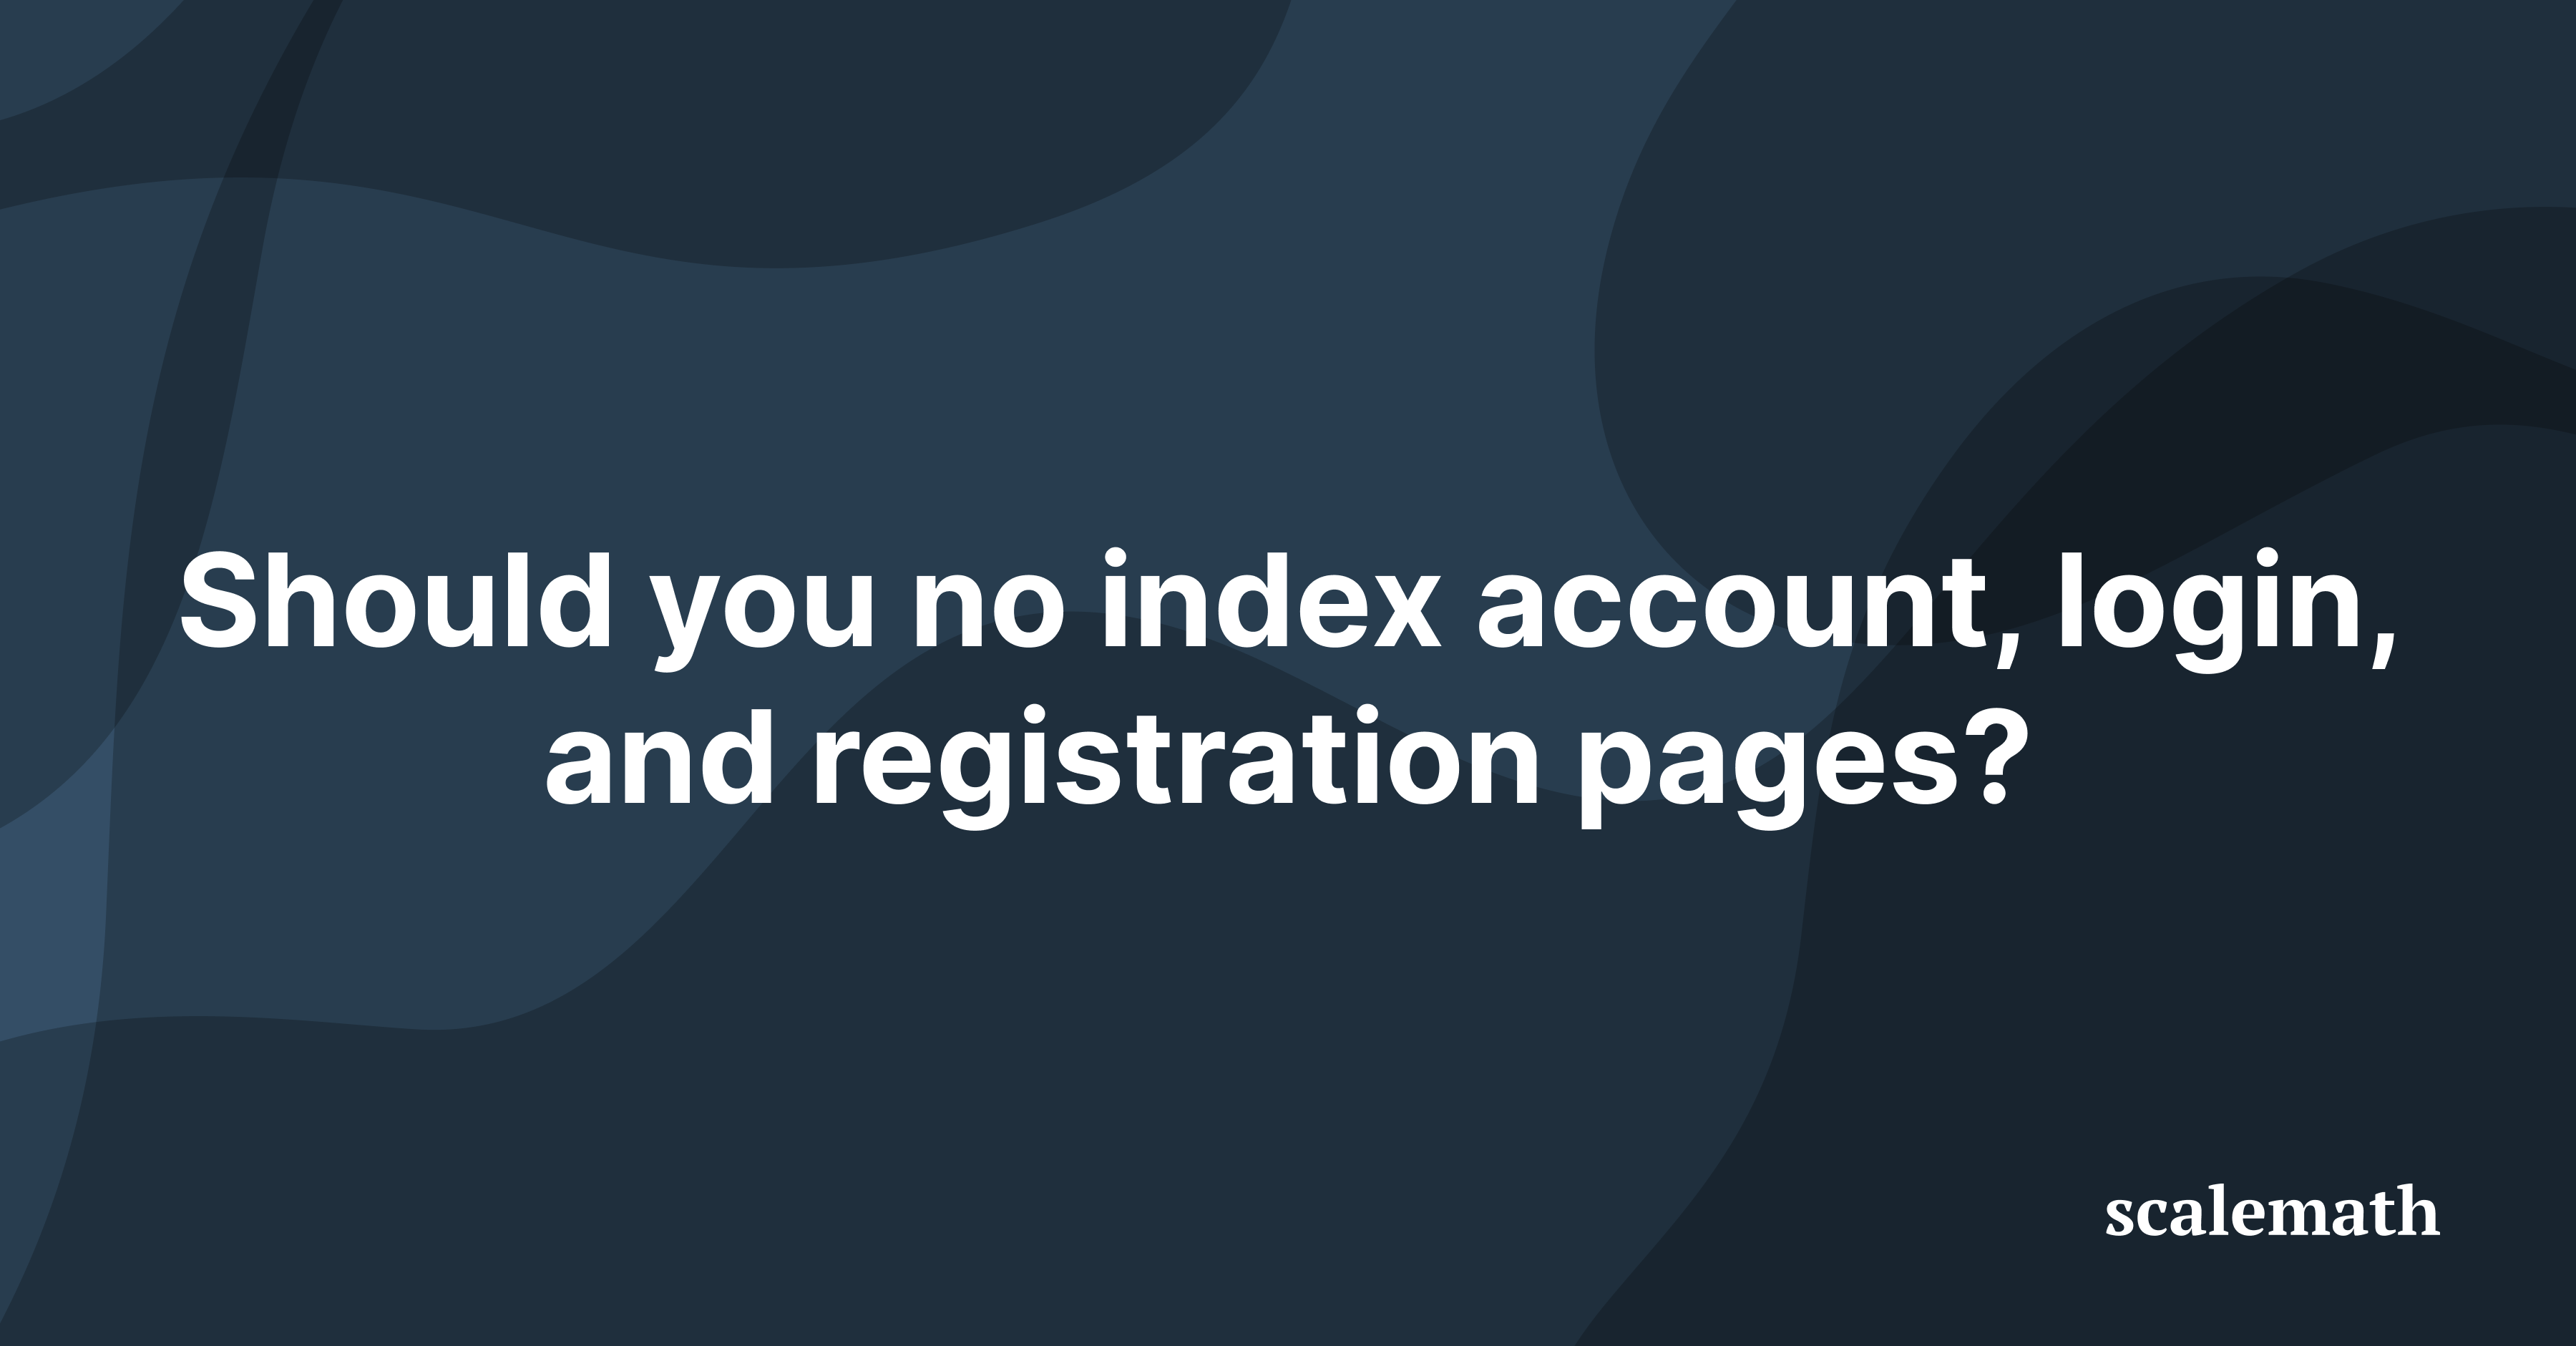 Should you no index account, login, and registration pages?